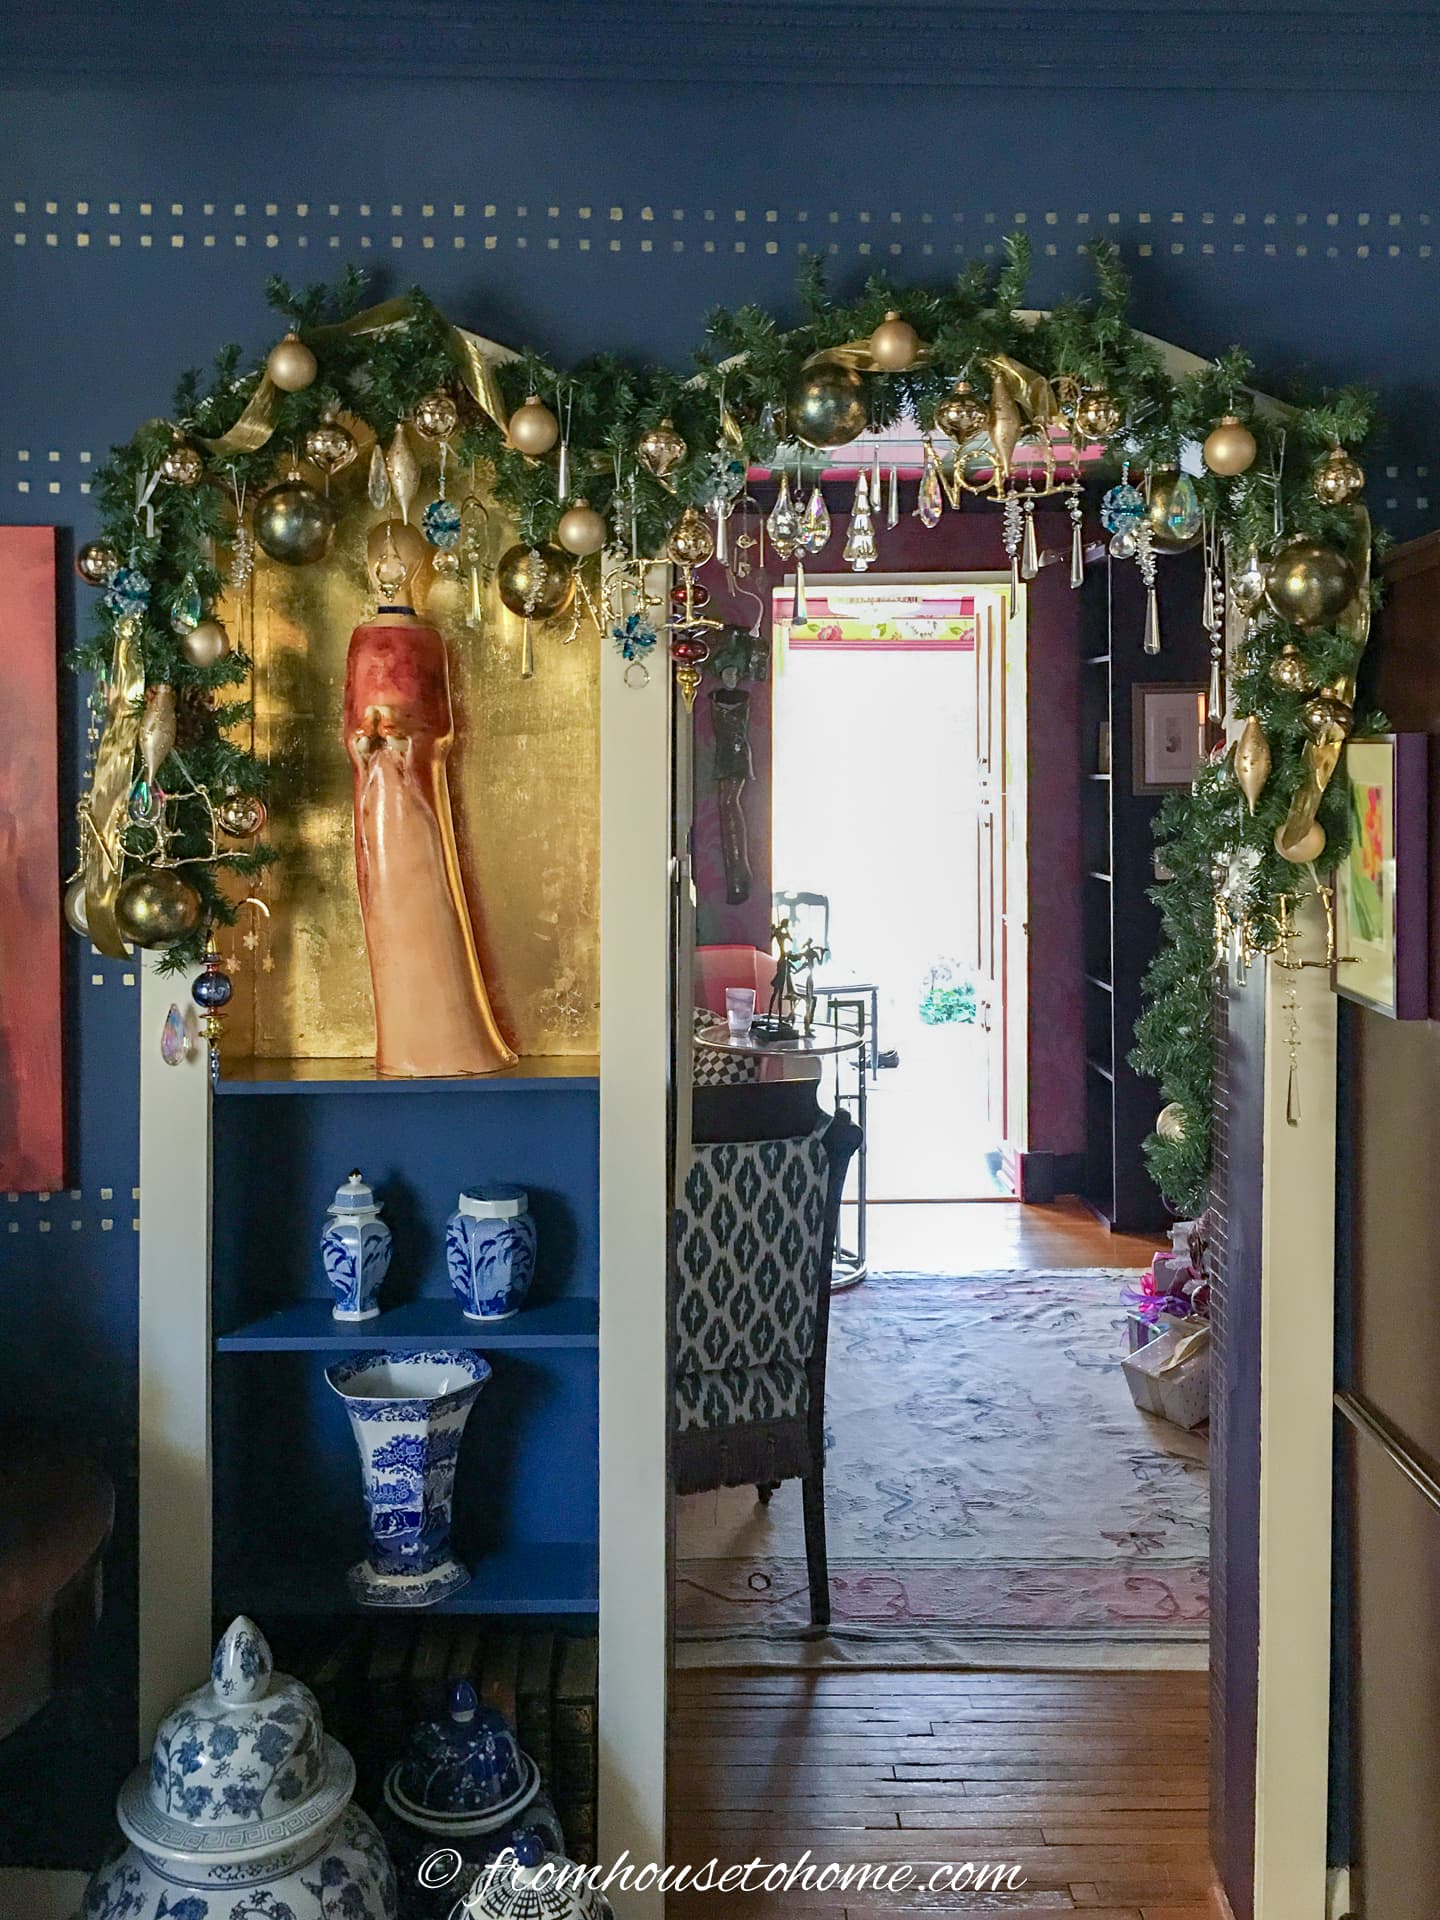 Decorated garland hung over a doorway